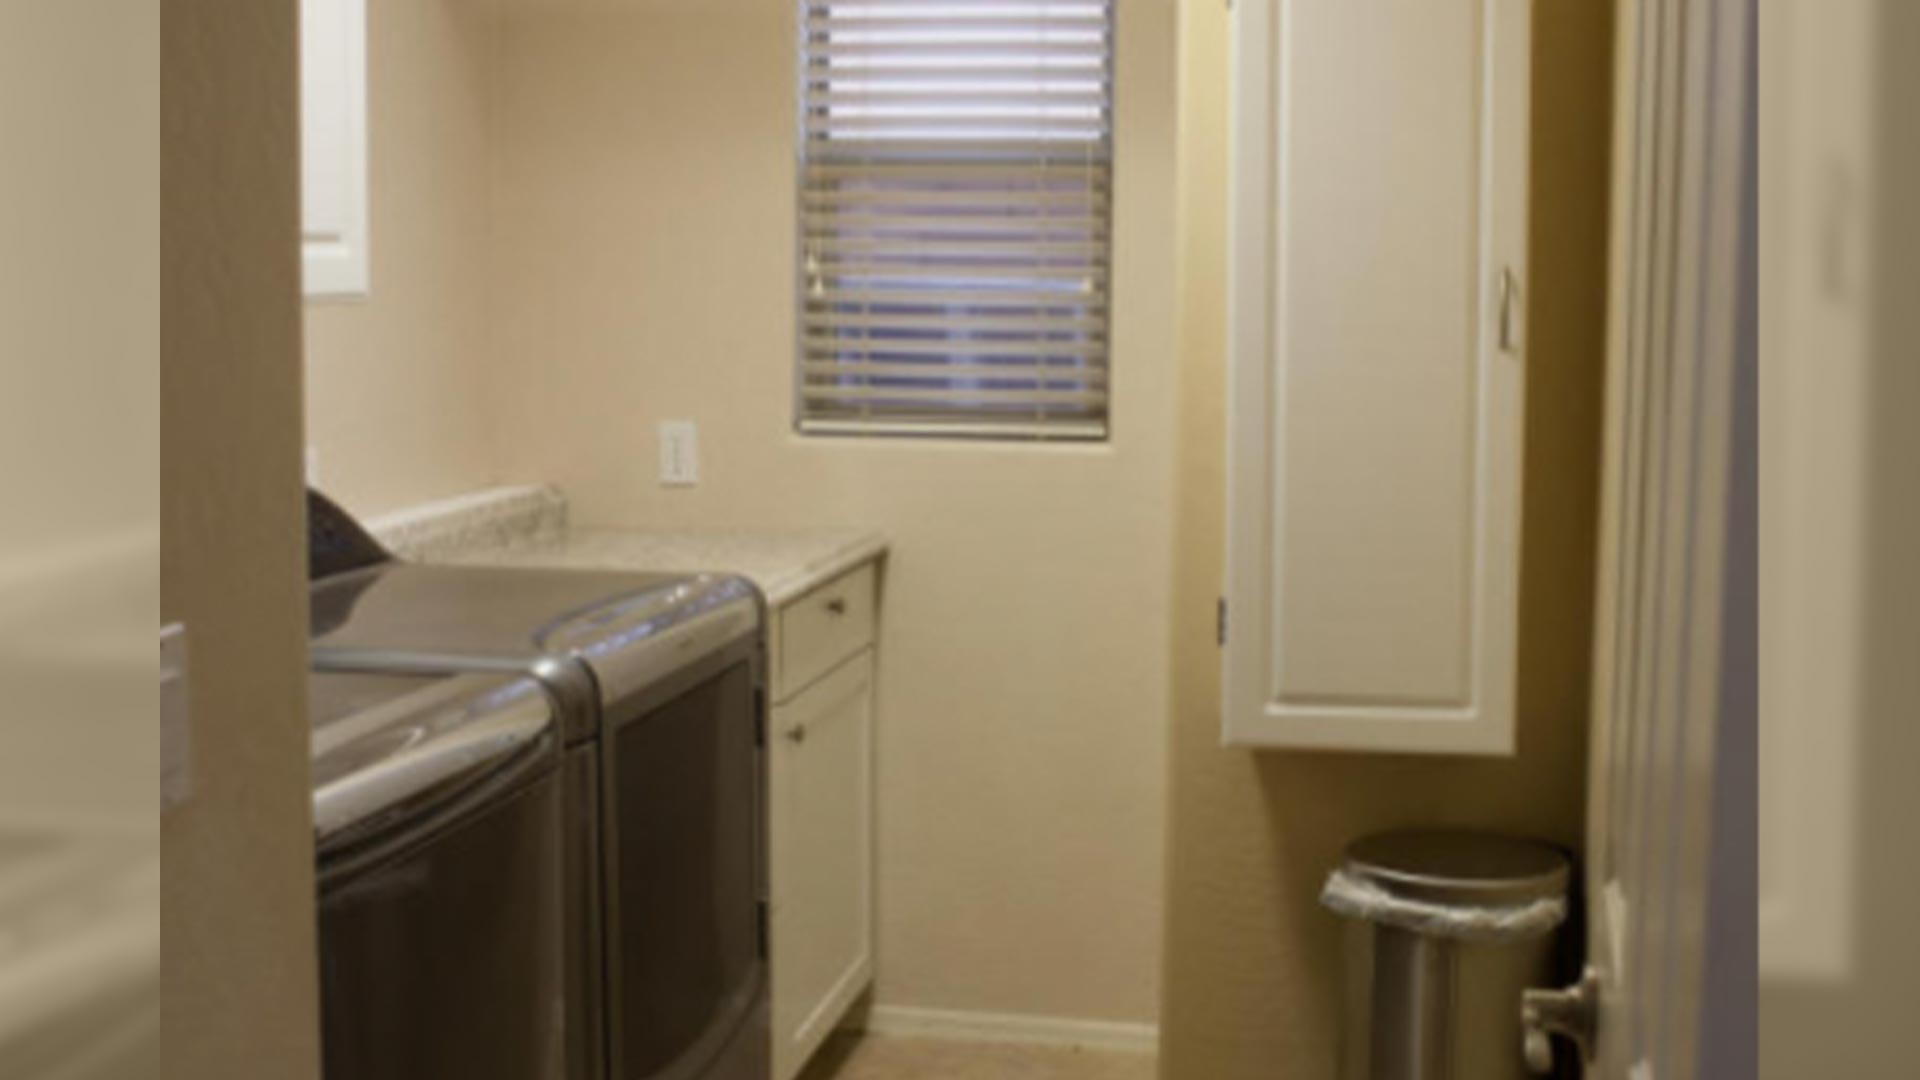 Laundry Room - Before